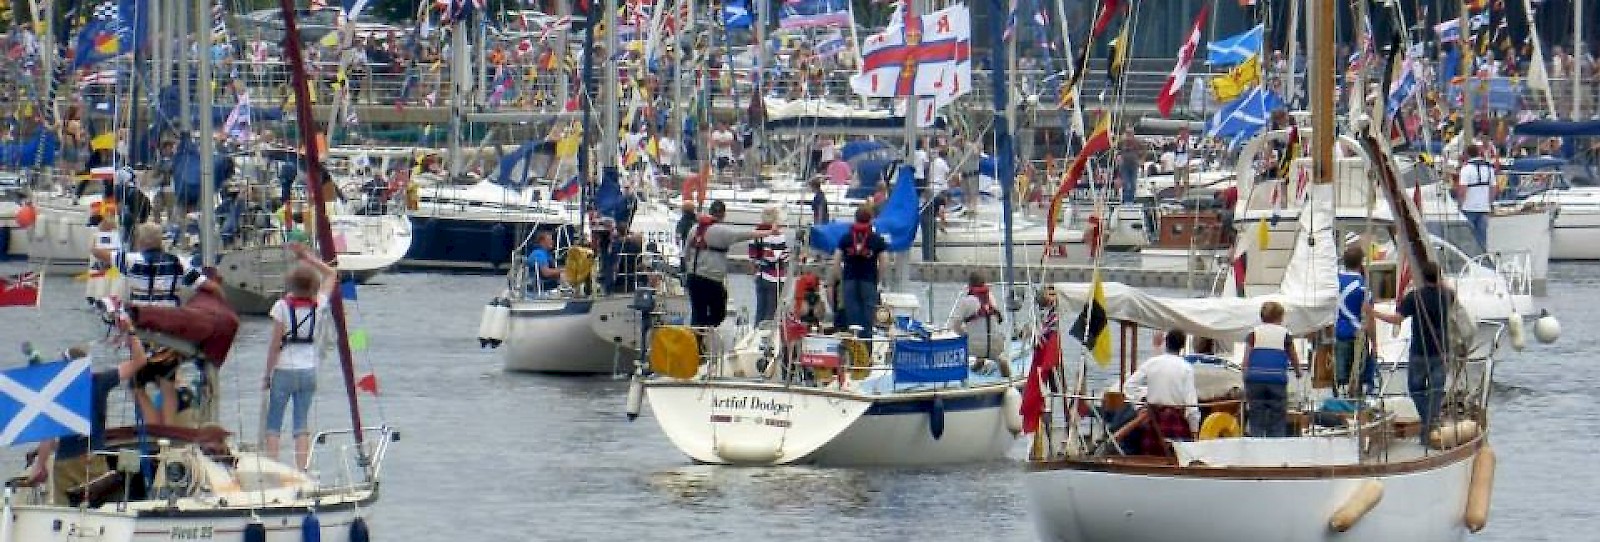 UK Racing Yachts Operating Commercially Must Be Coded